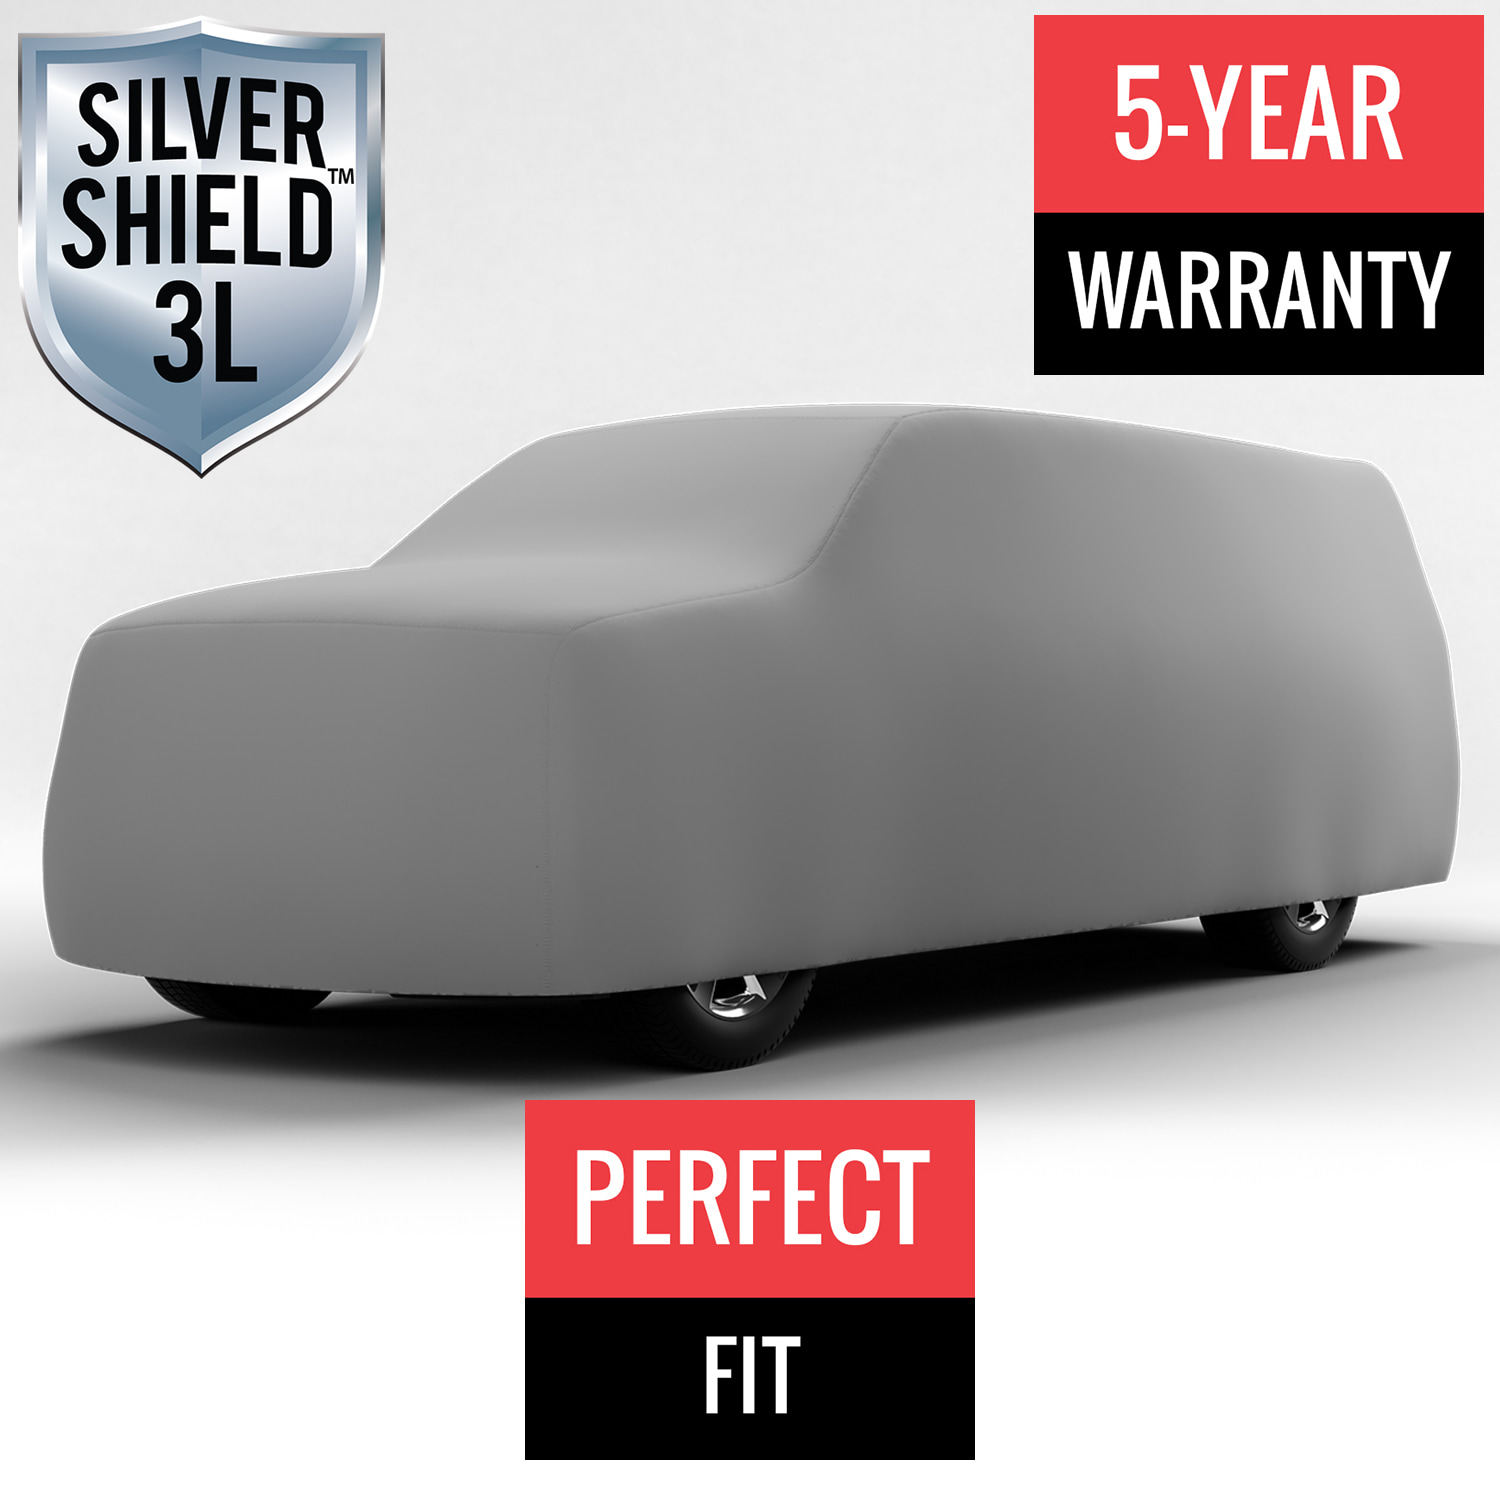 Silver Shield 3L - Car Cover for GMC C1500 1998 Regular Cab Pickup 8.0 Feet Bed with Camper Shell